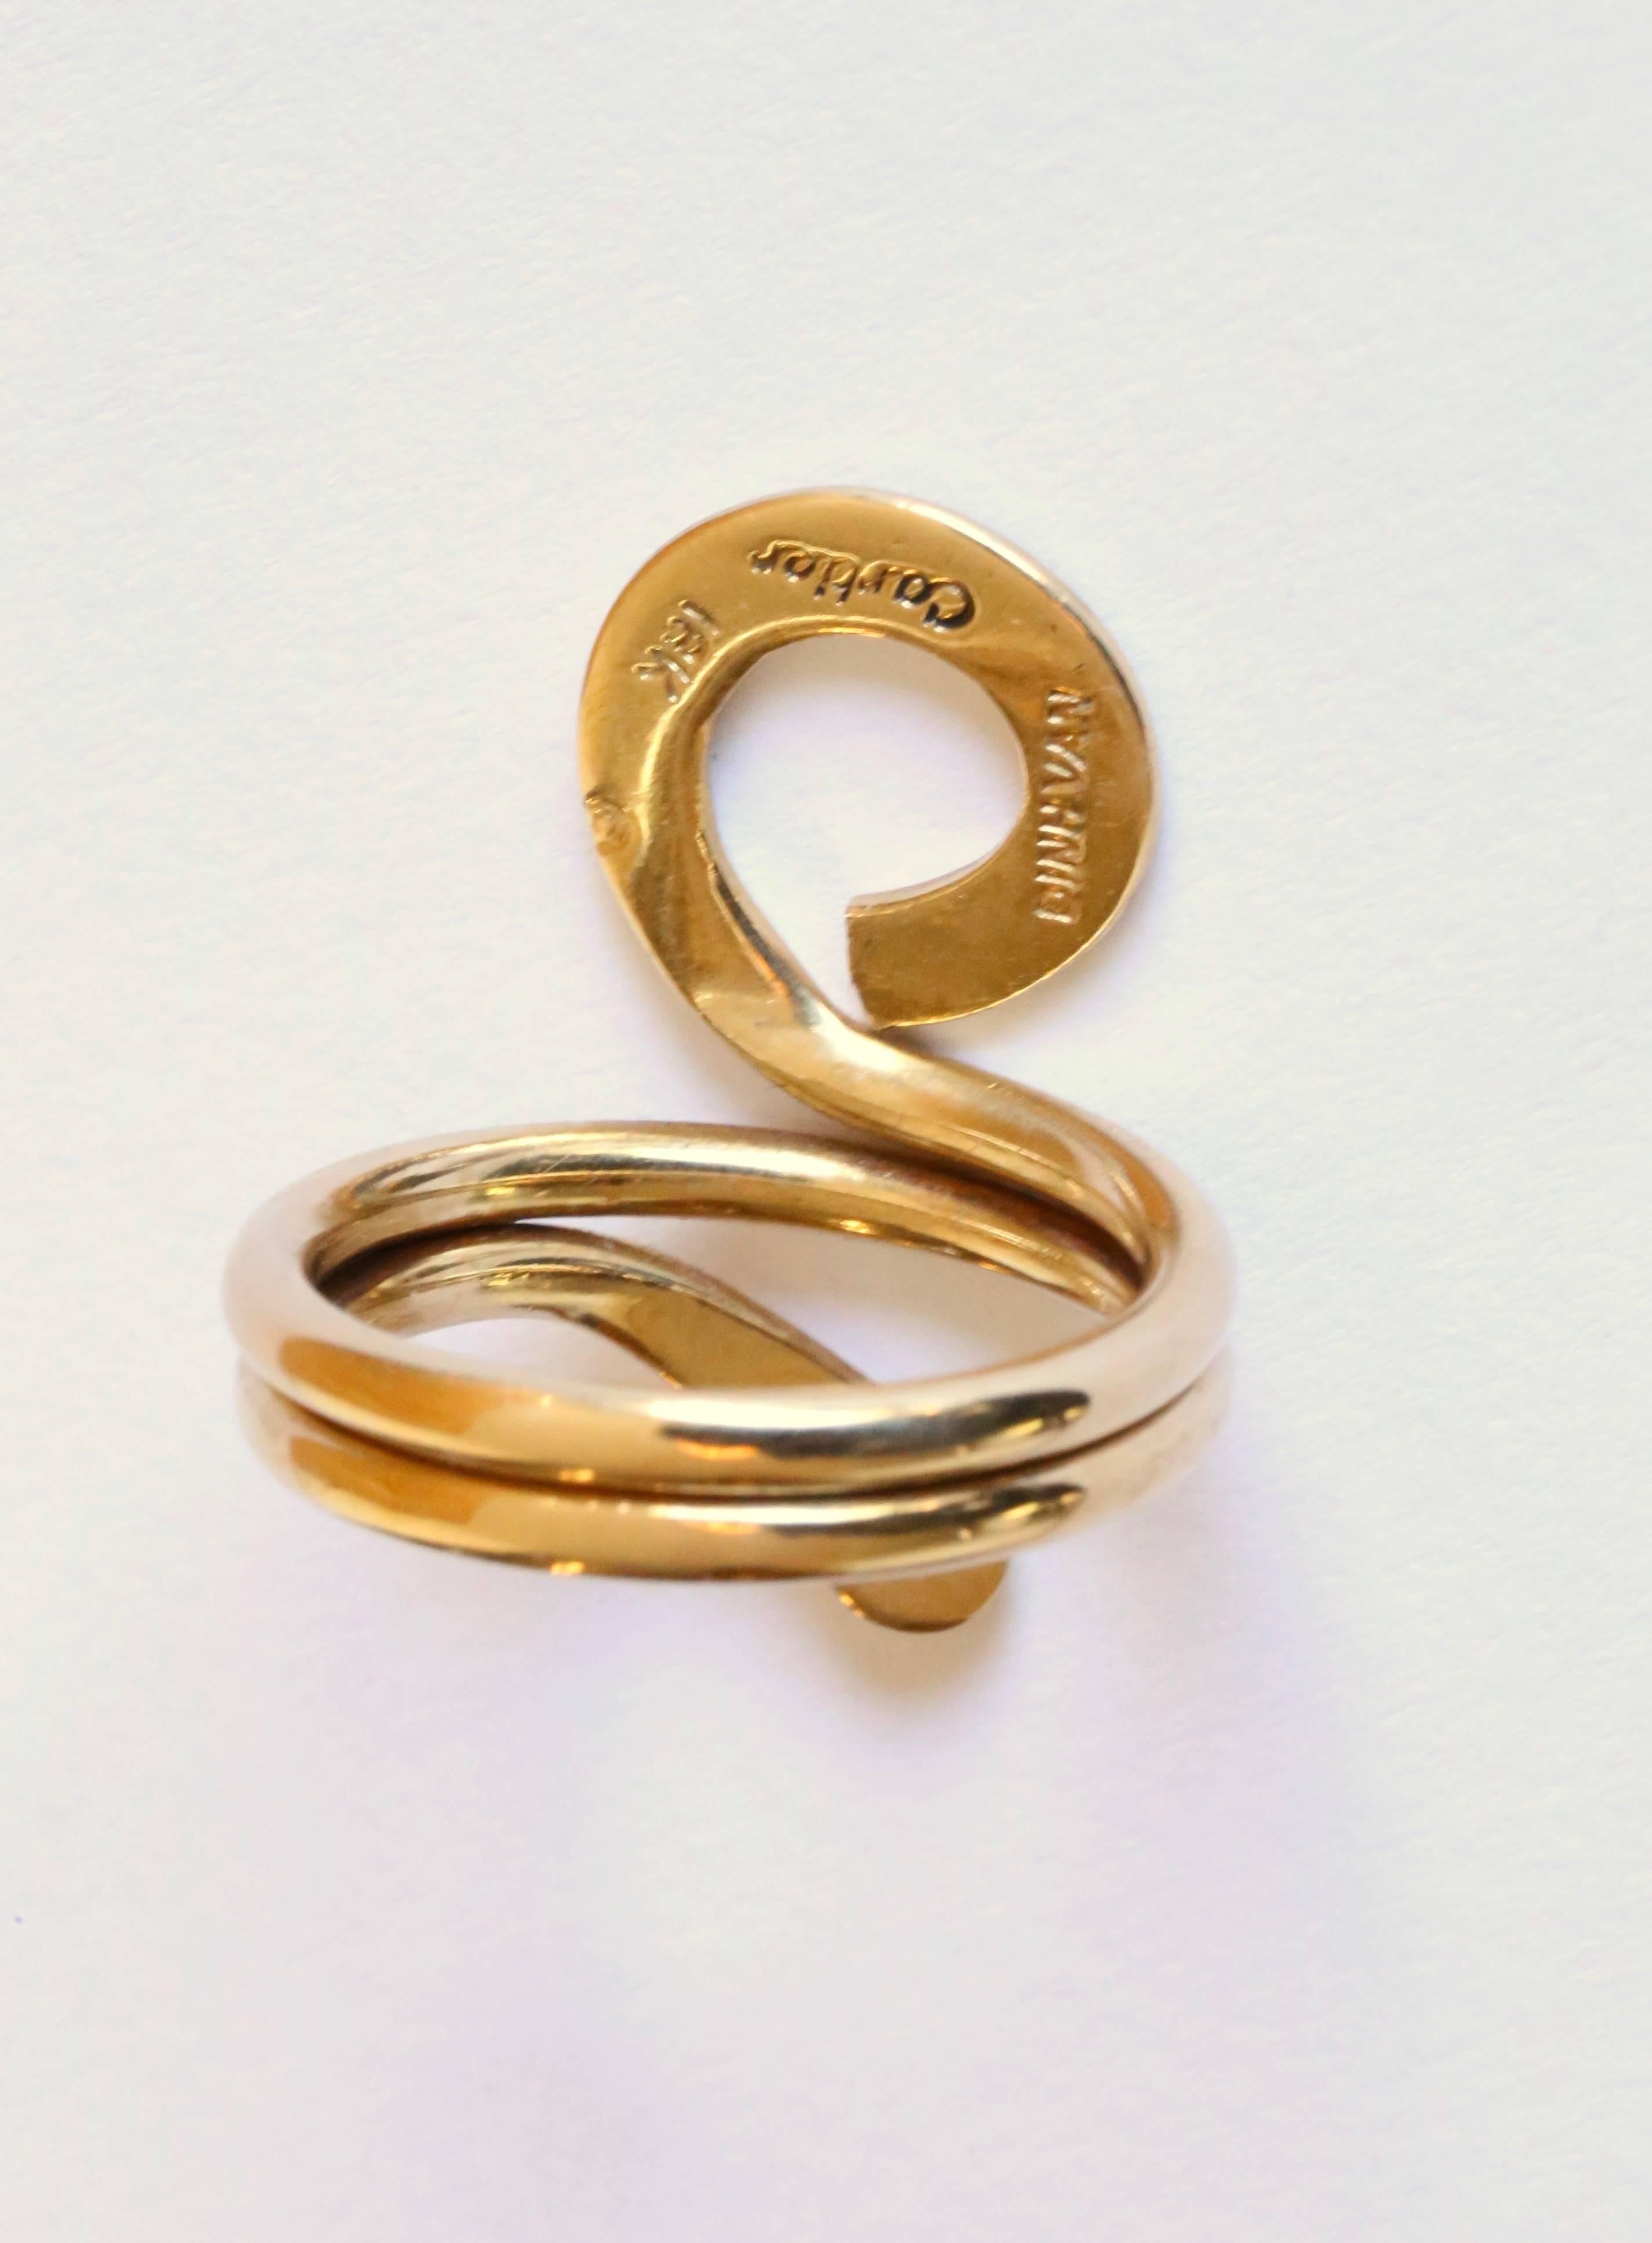 Fantastic freeform ring designed by Jean Dinh Van for Cartier dating to the 1960's. Size 6.5. Ring is both bold yet delicate at the same time. It has been made freeform meaning no two are alike. When made, the ends were tapered down very thinly and